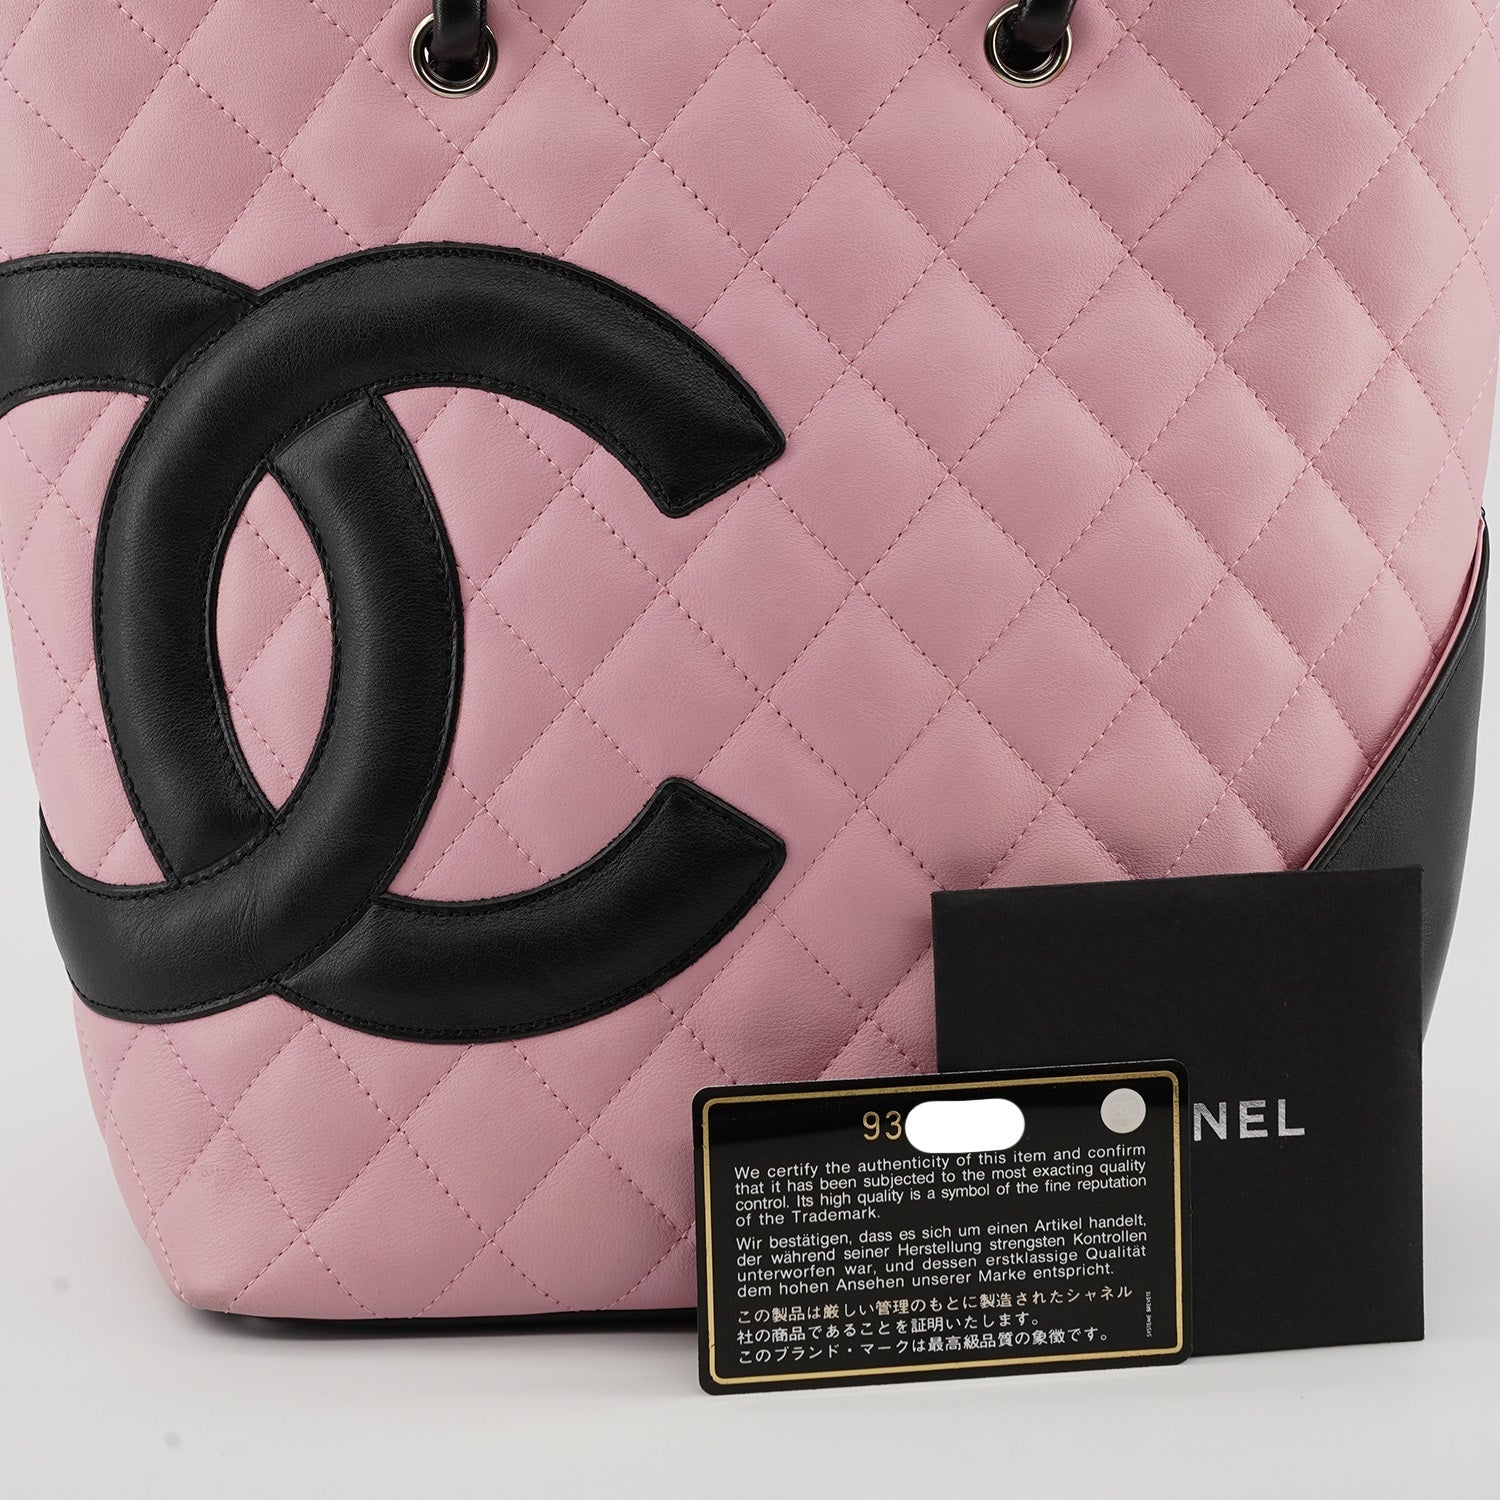 pink and black chanel purse small